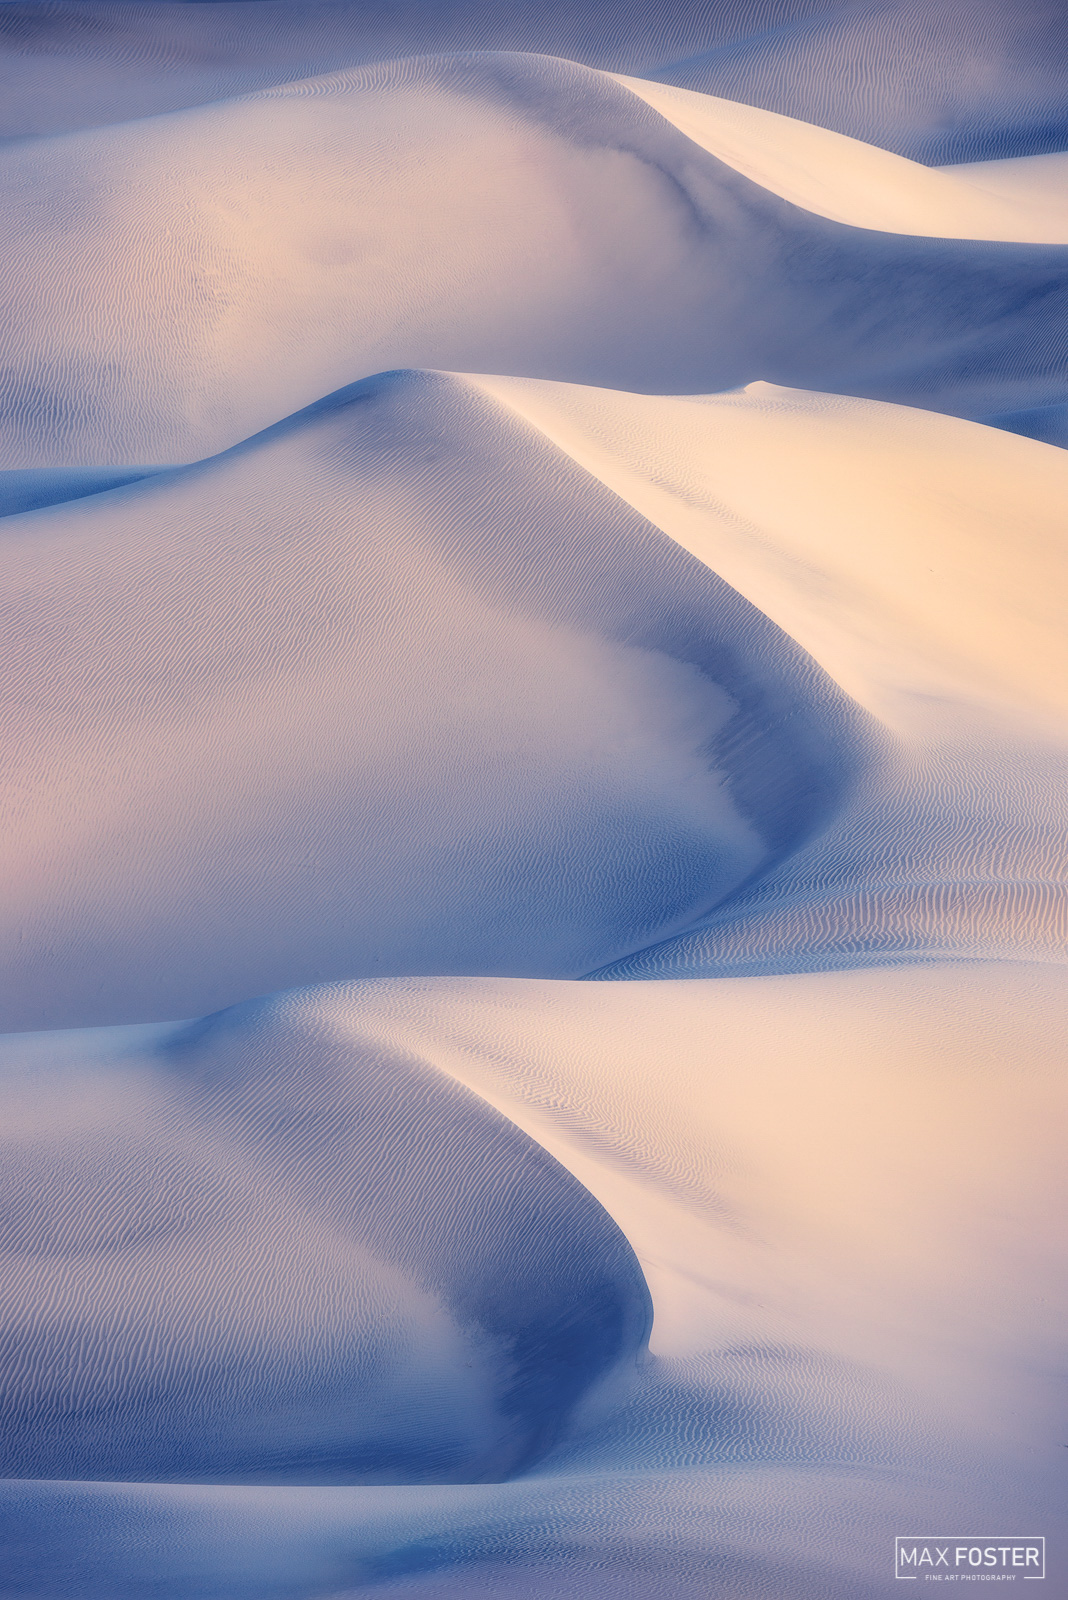 Bring nature into your home with Magic Carpet, Max Foster's limited edition photography print of Mesquite Flat Sand Dunes in...